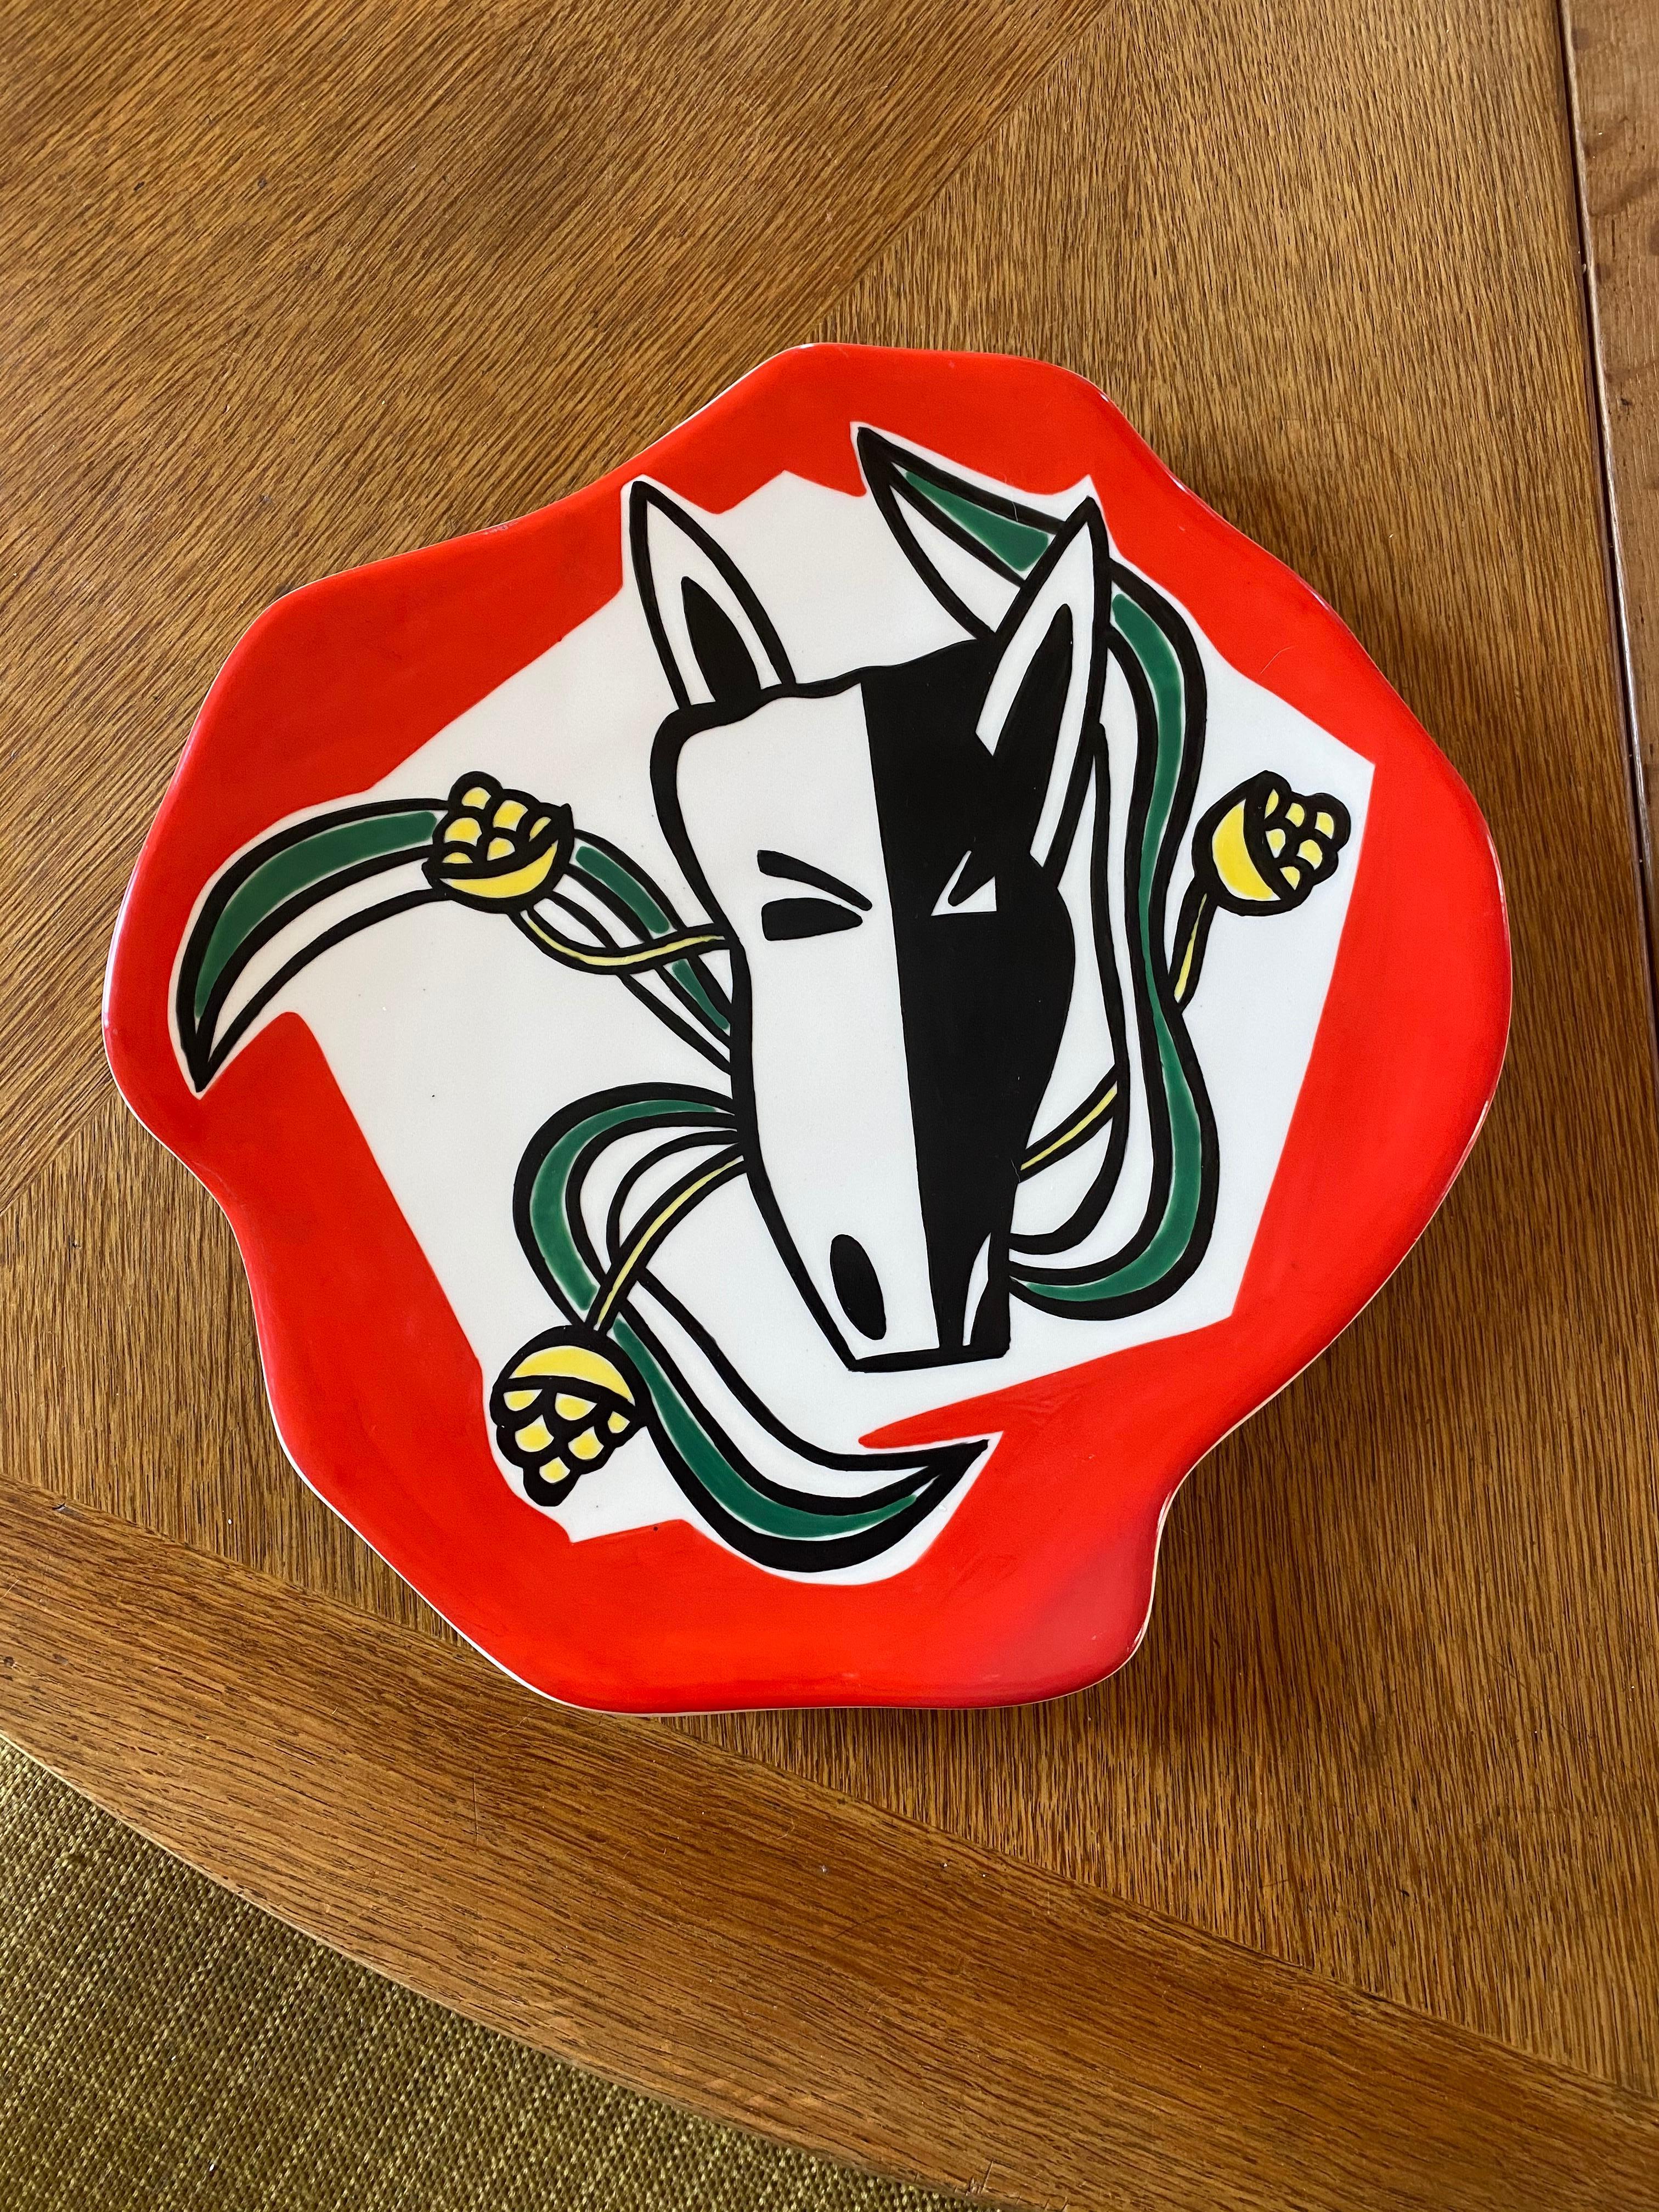 Roland Brice (1911-1989) large ceramic dish, Biot, 1950
Decor painted by Roland Brice, signed and located: 